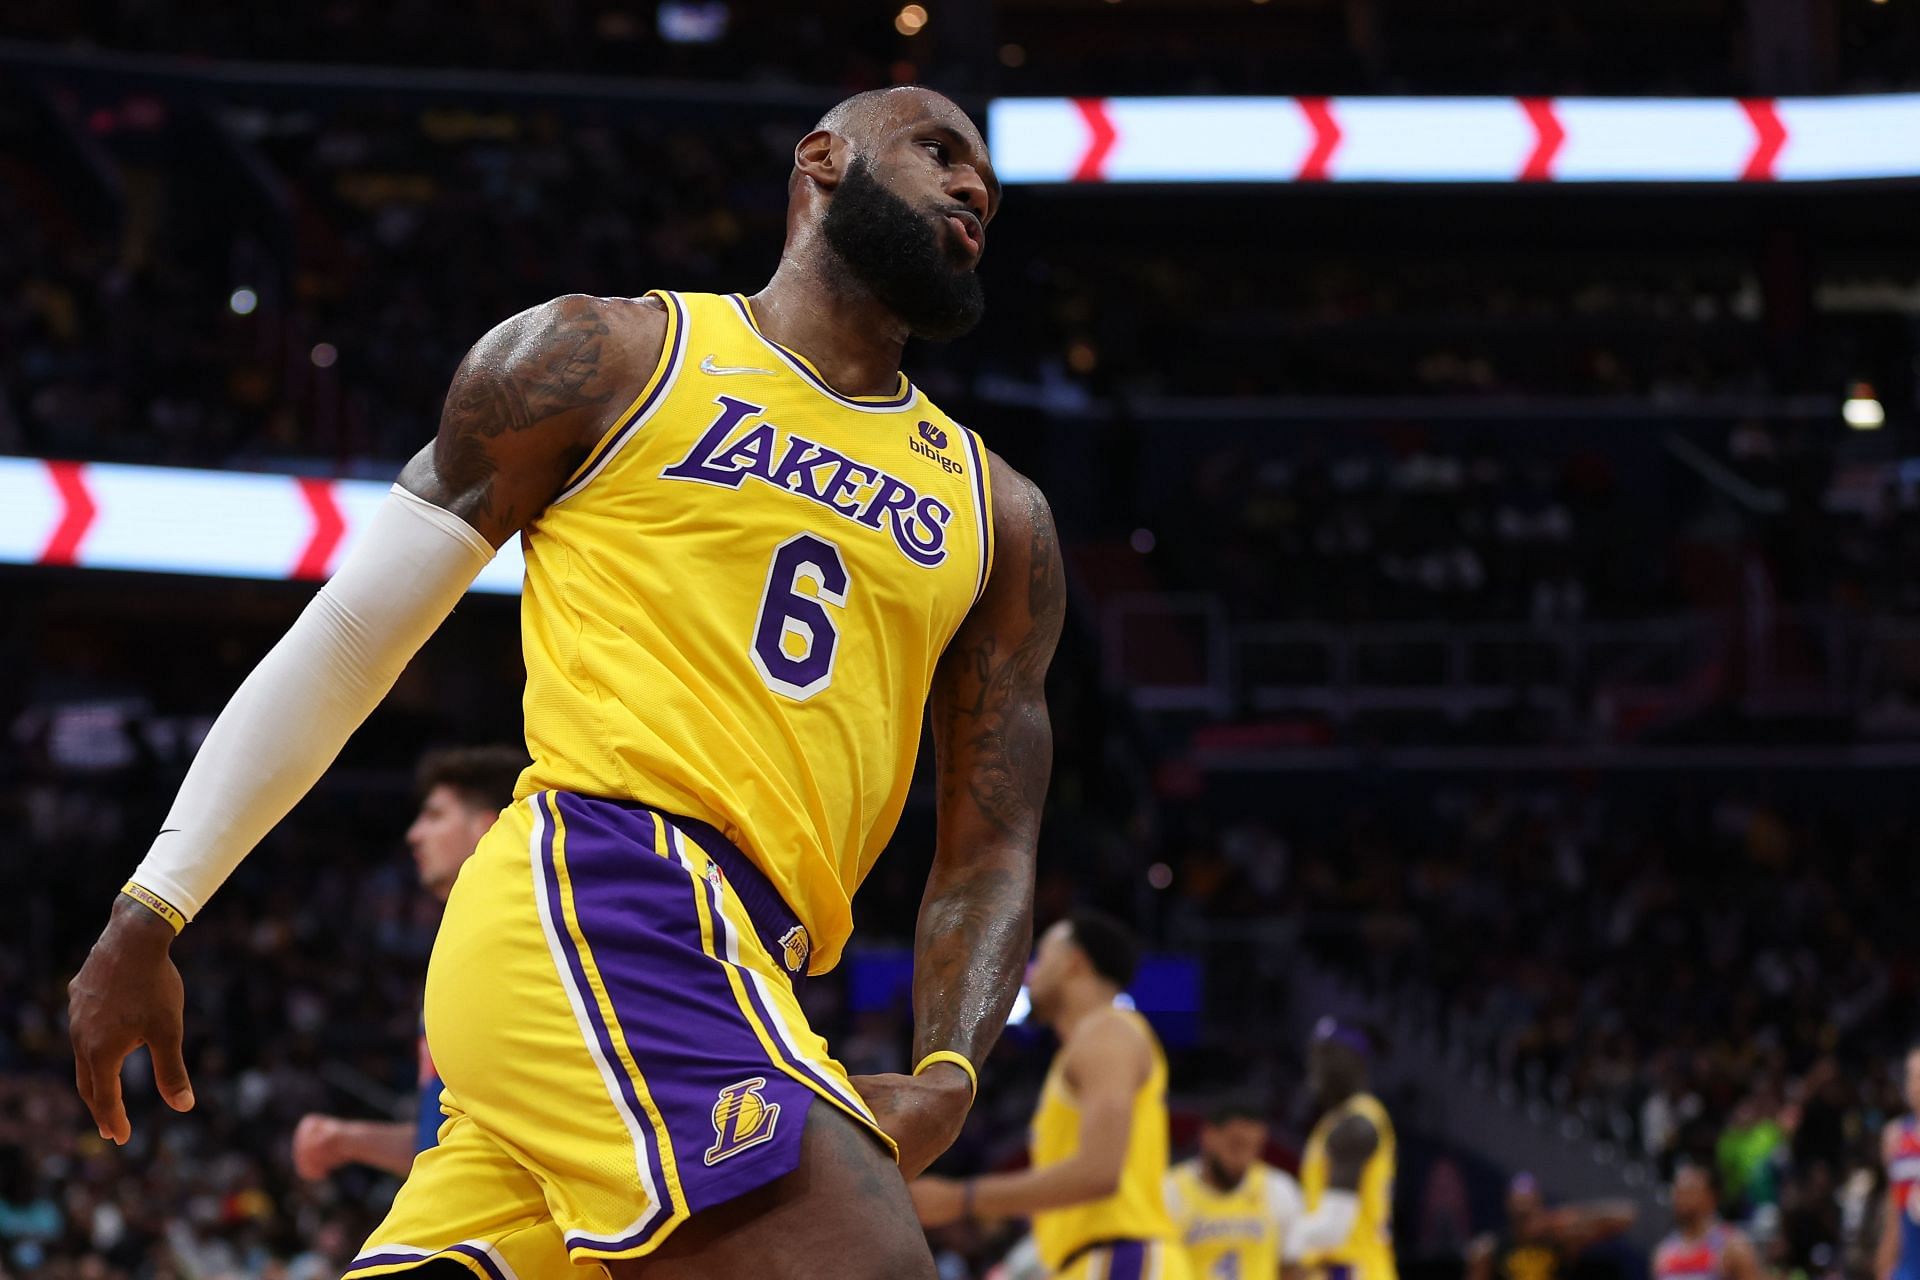 LeBron James of the LA Lakers against the Washington Wizards